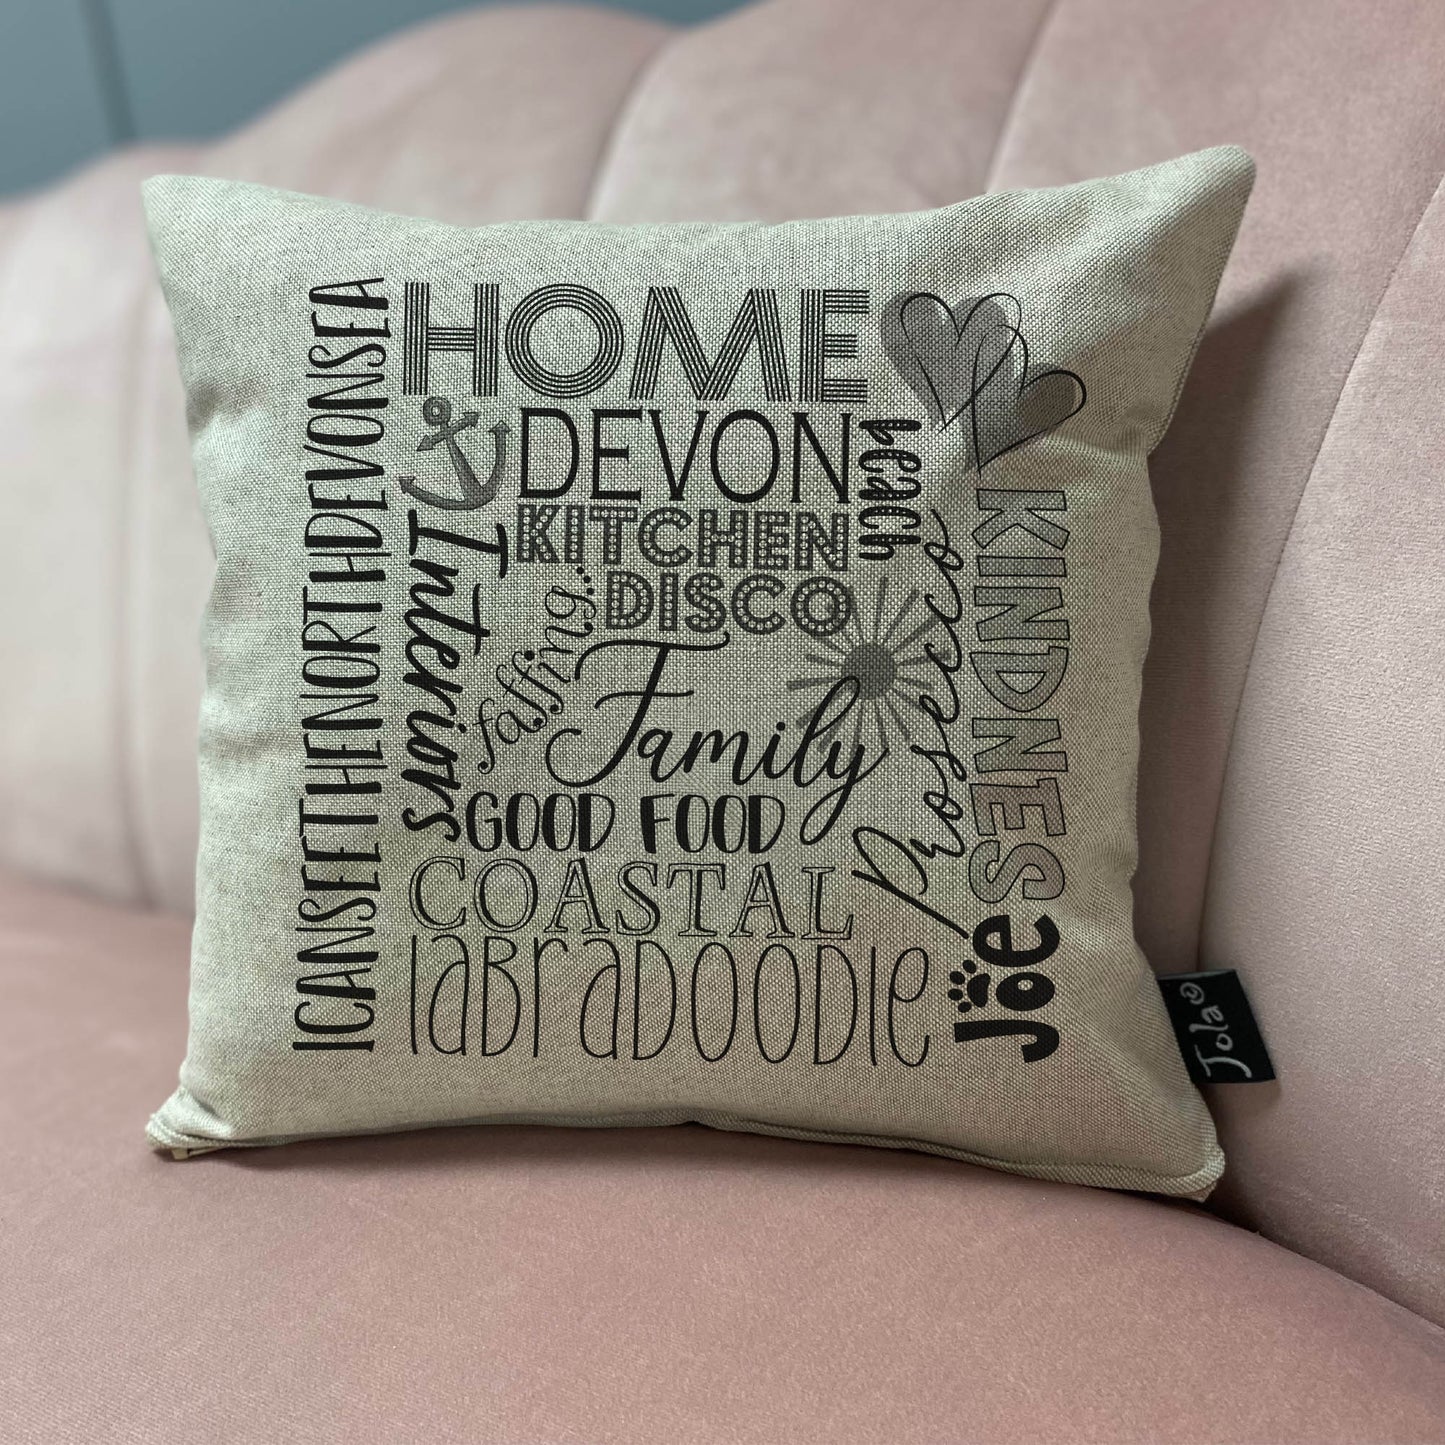 Personalised Typography Cushion